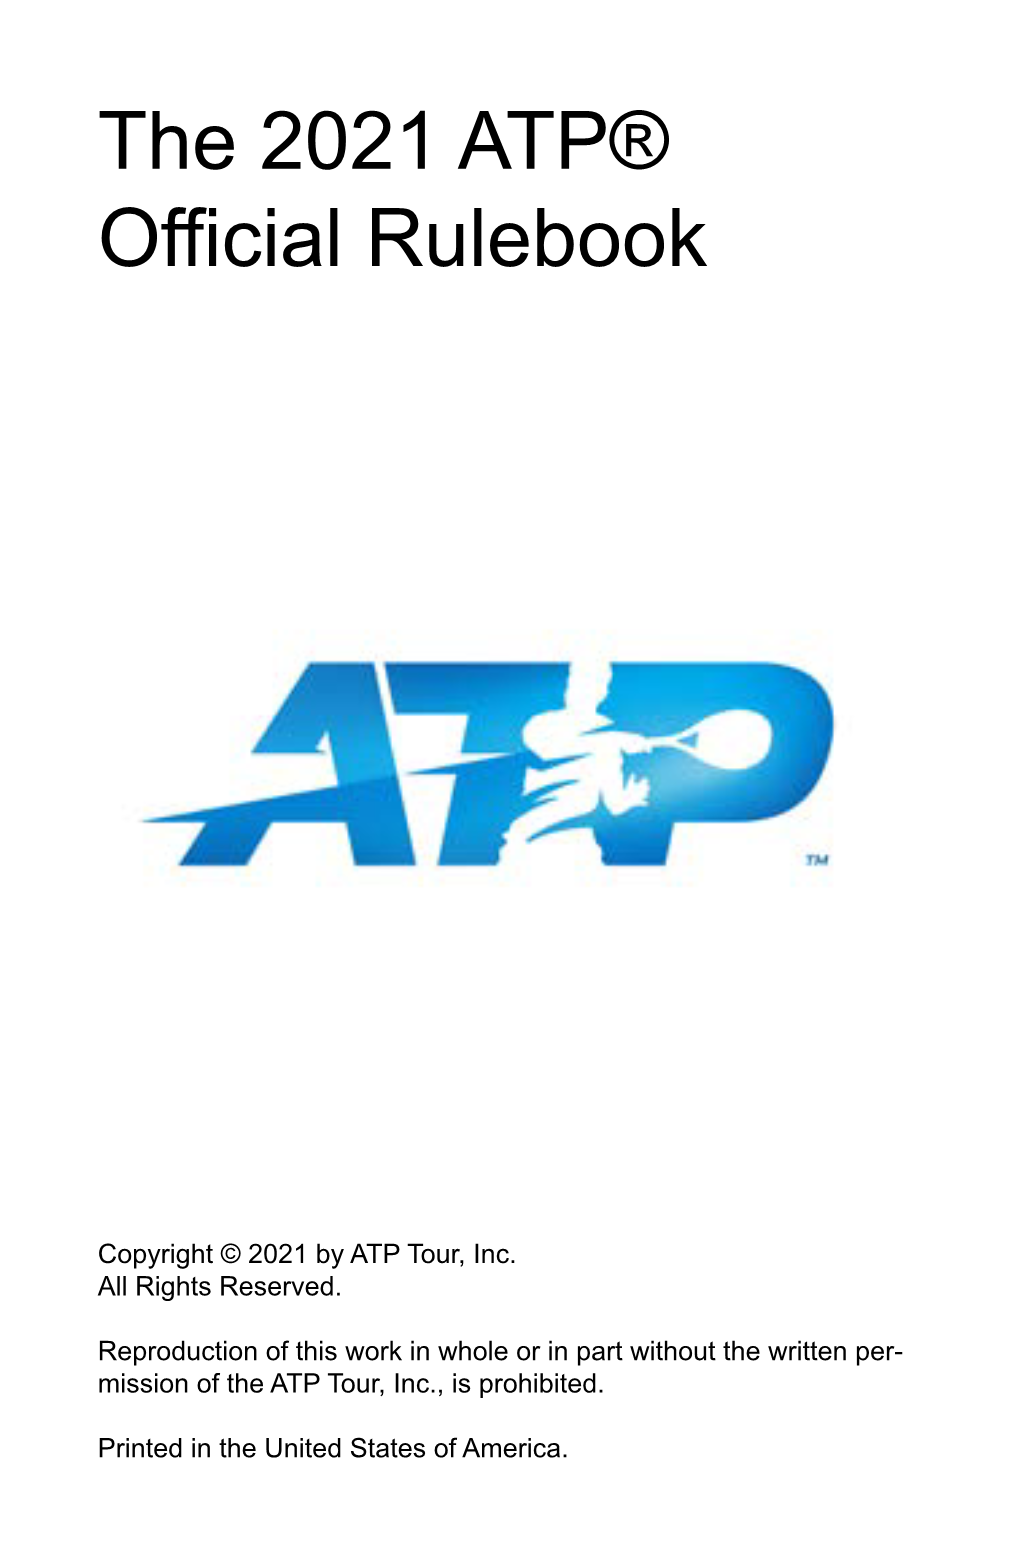 The 2021 ATP® Official Rulebook